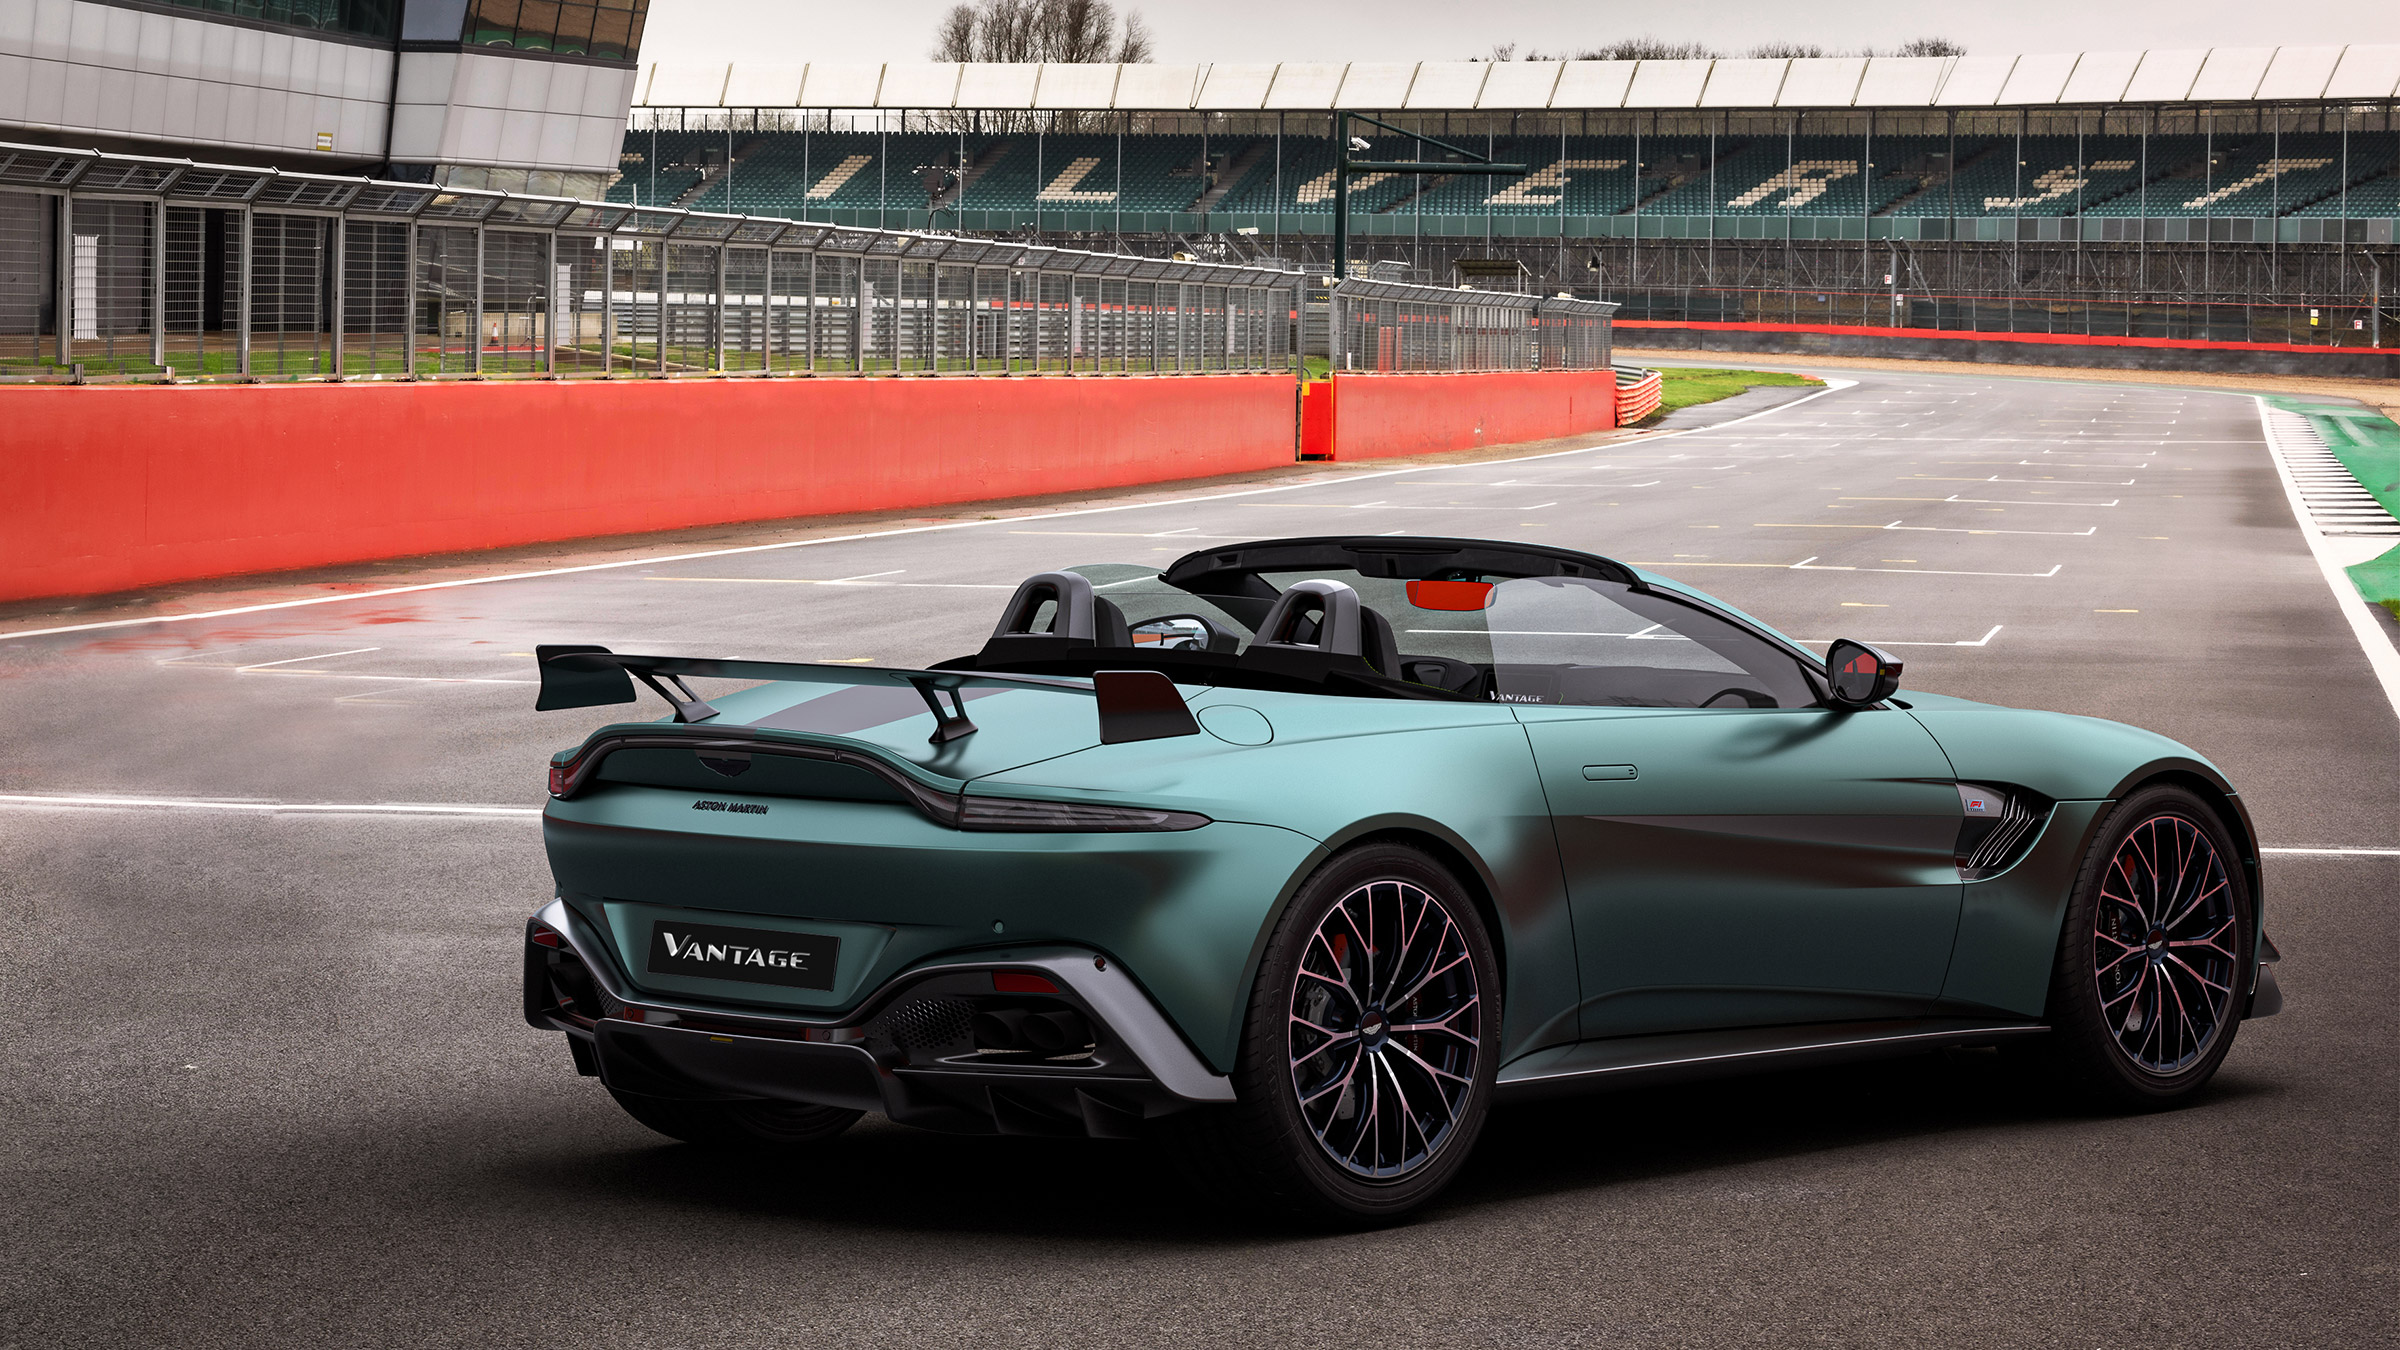 Aston Martin Vantage F1 Edition revealed – new Coupe and Roadster